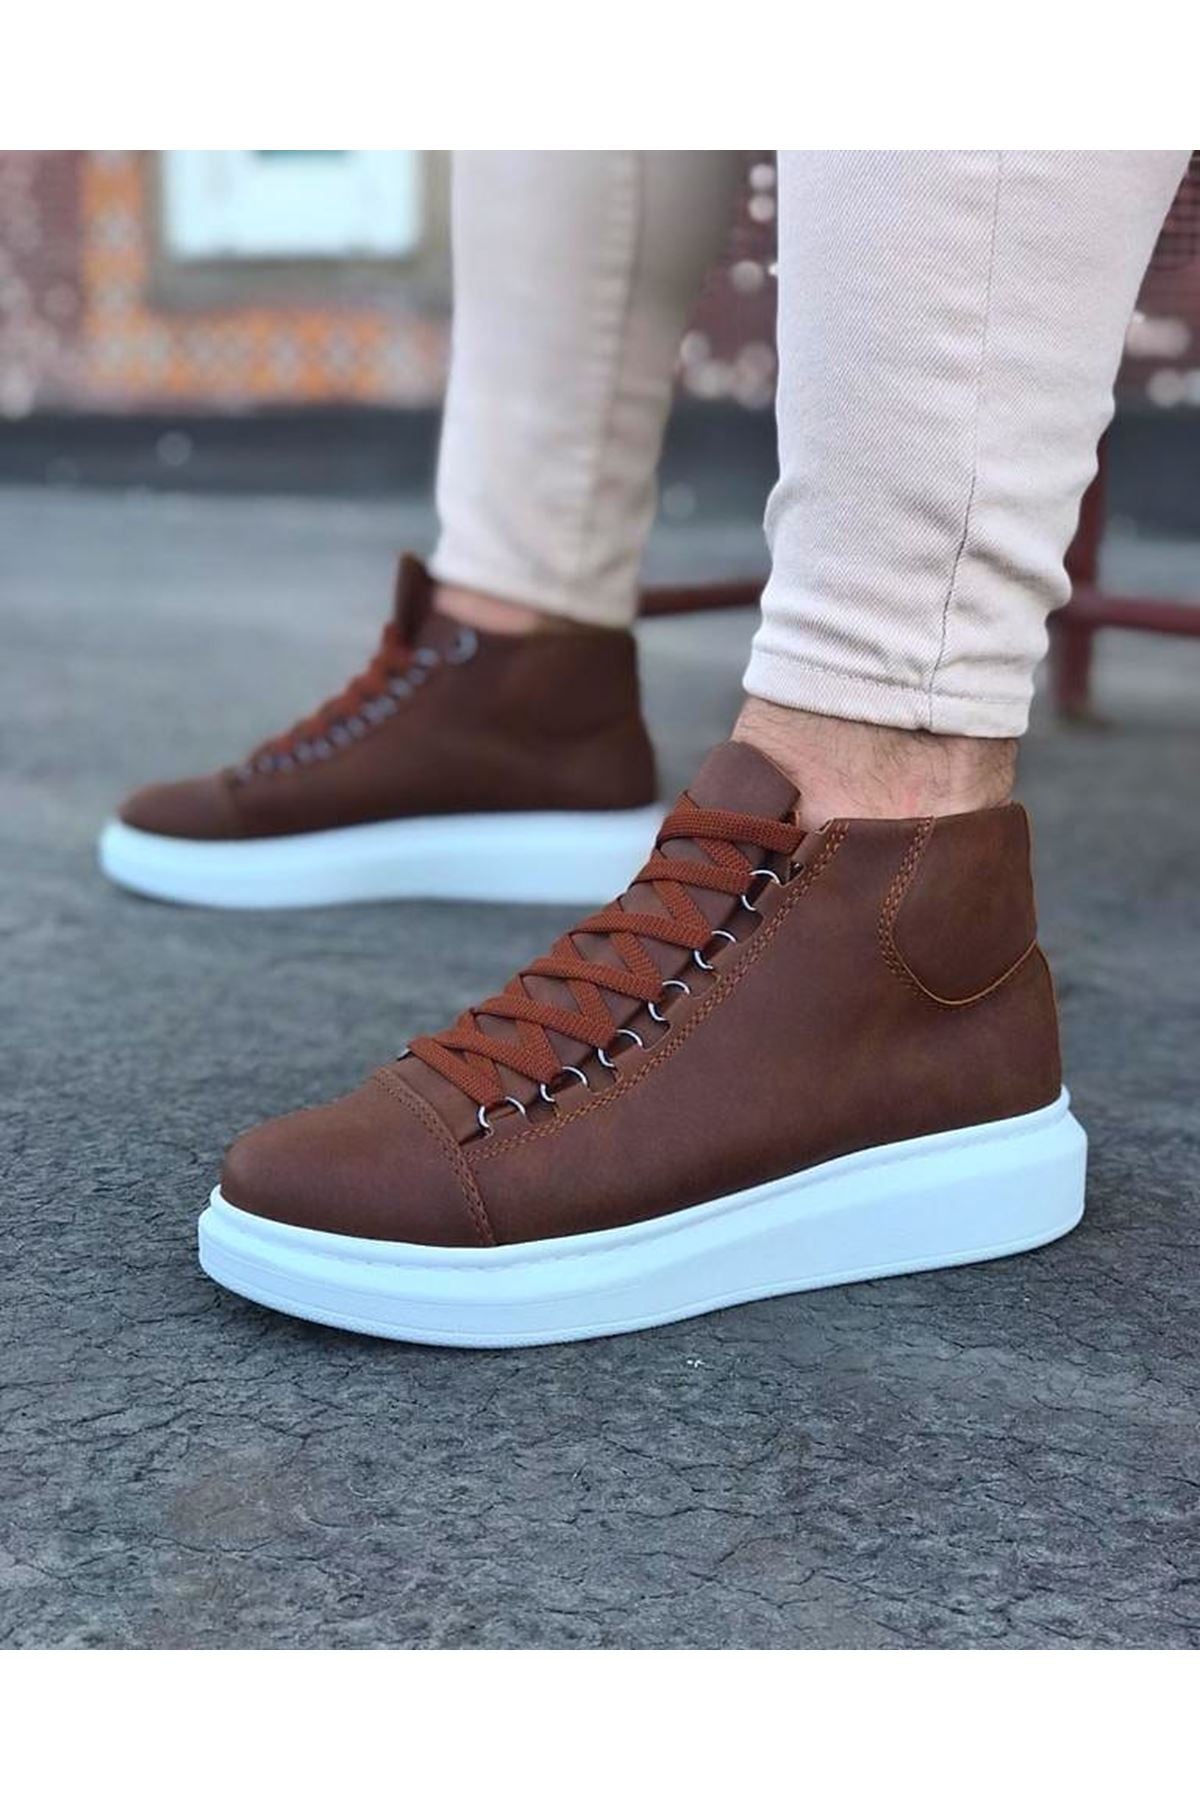 WG032 Tan Lace-up Sneakers Half Ankle Boots - STREETMODE™